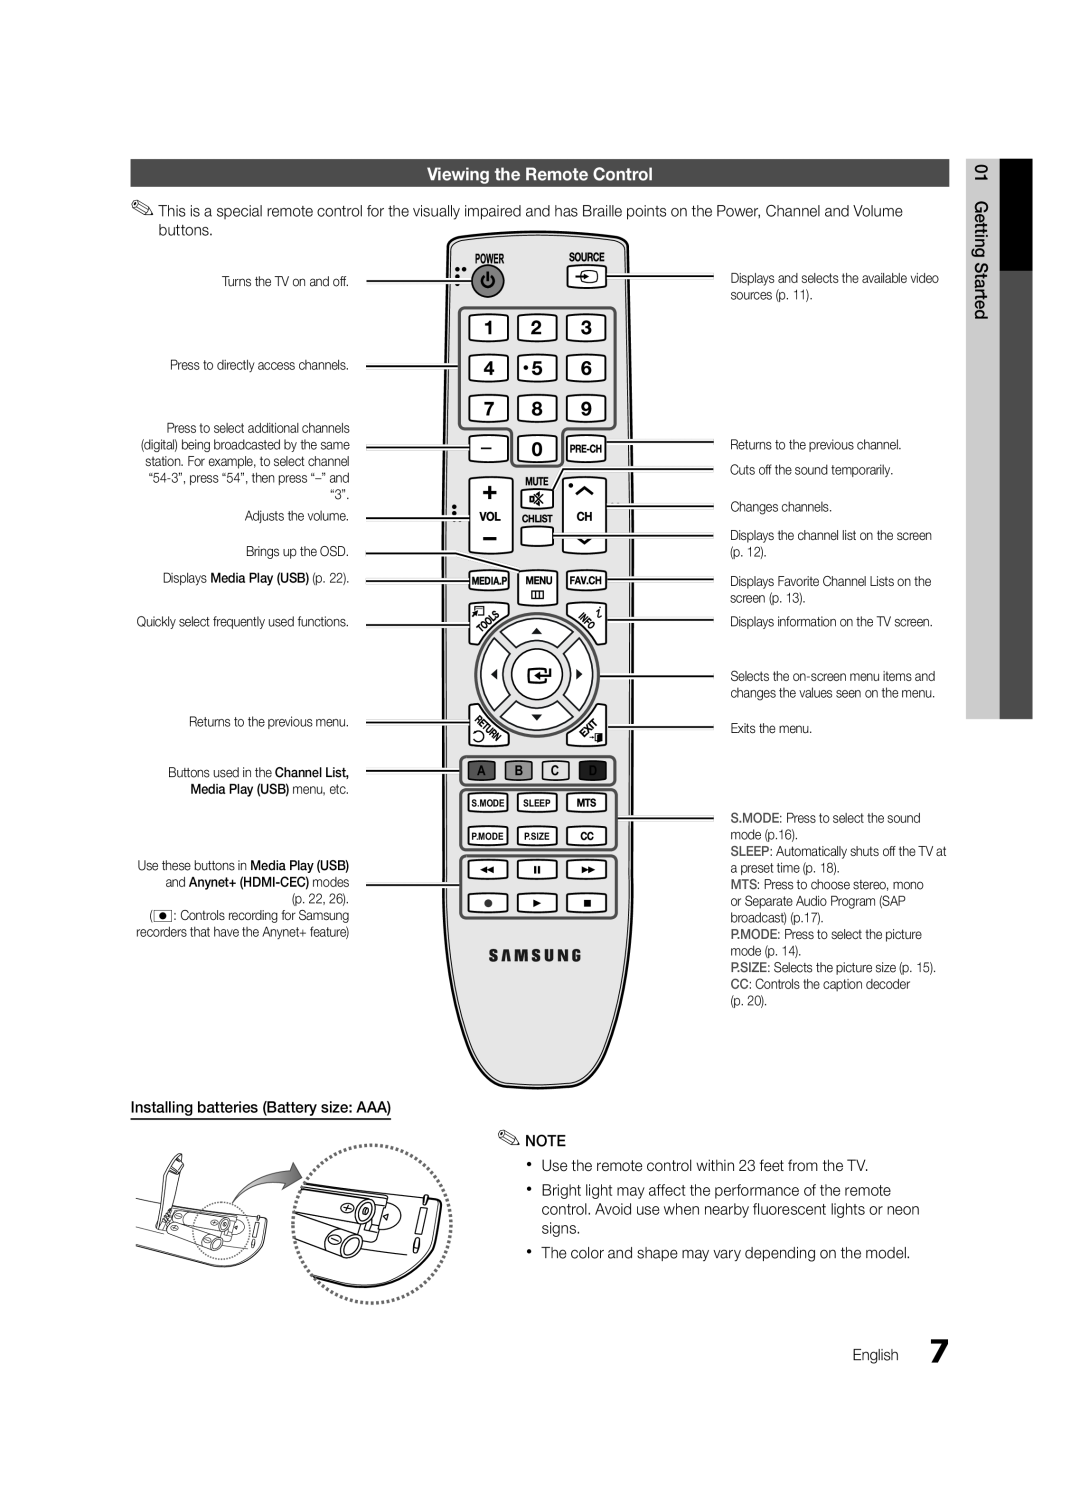 Samsung PC430-ZC user manual Viewing the Remote Control, Getting, Started, Installing batteries Battery size AAA, A B C D 